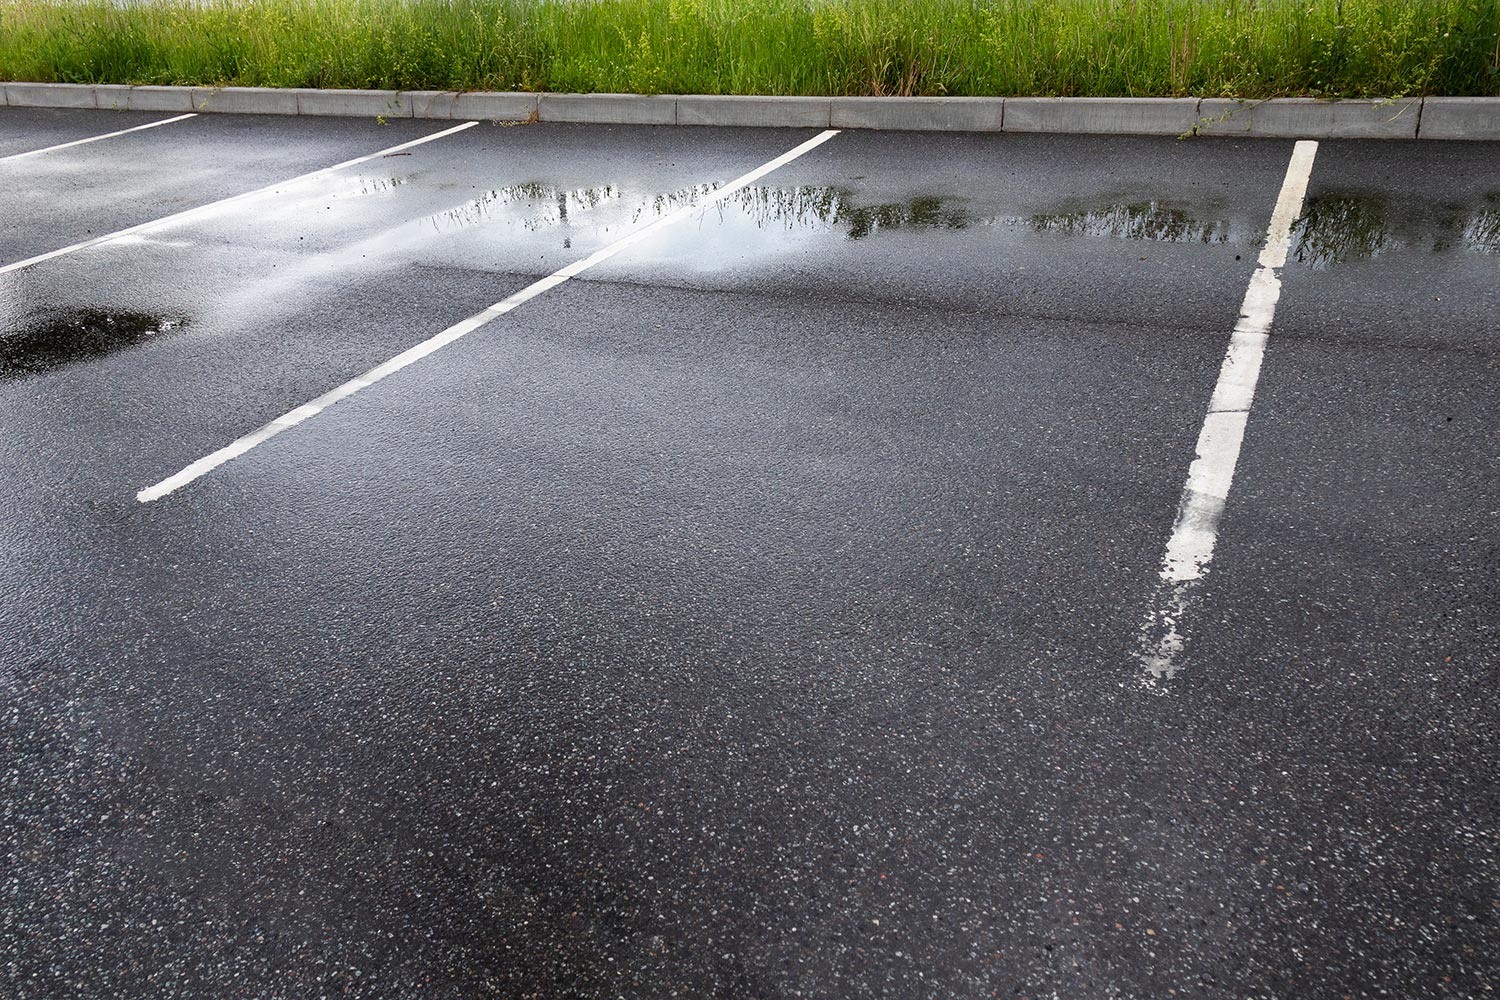 Parking spaces on wet gray asphalt with puddles